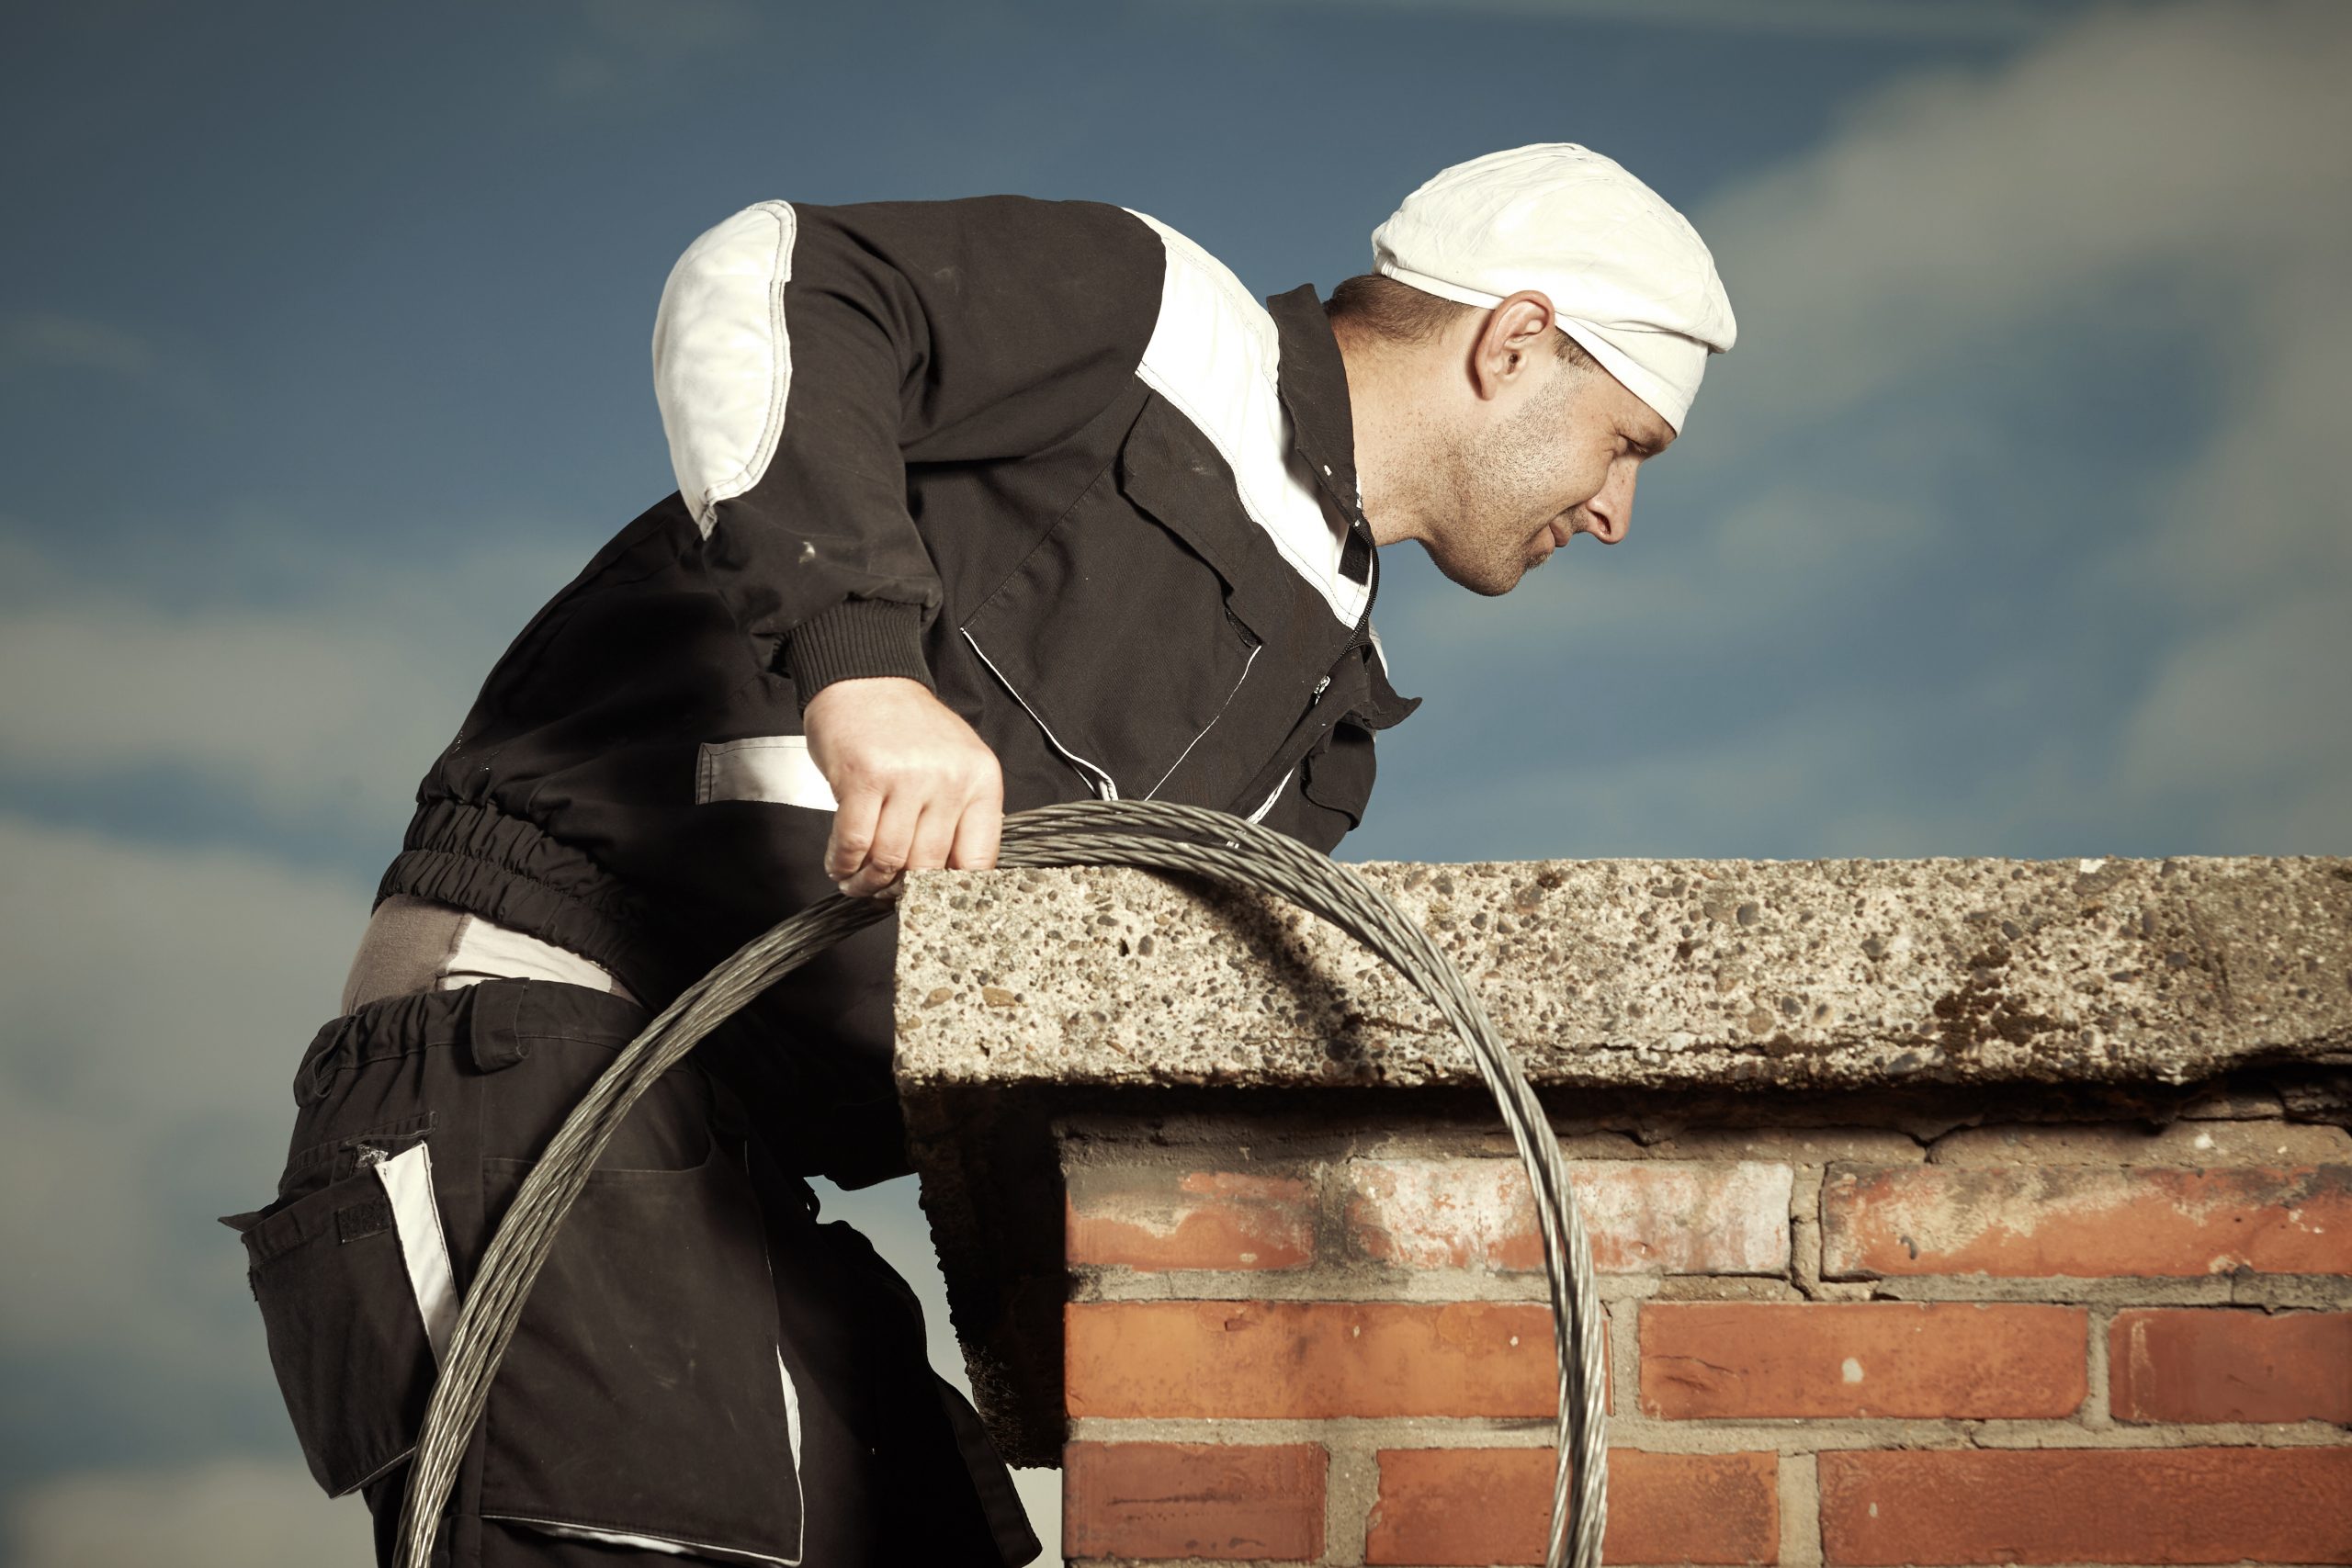 Chimney sweep man in work uniform cleaning brick style chimney on building roof